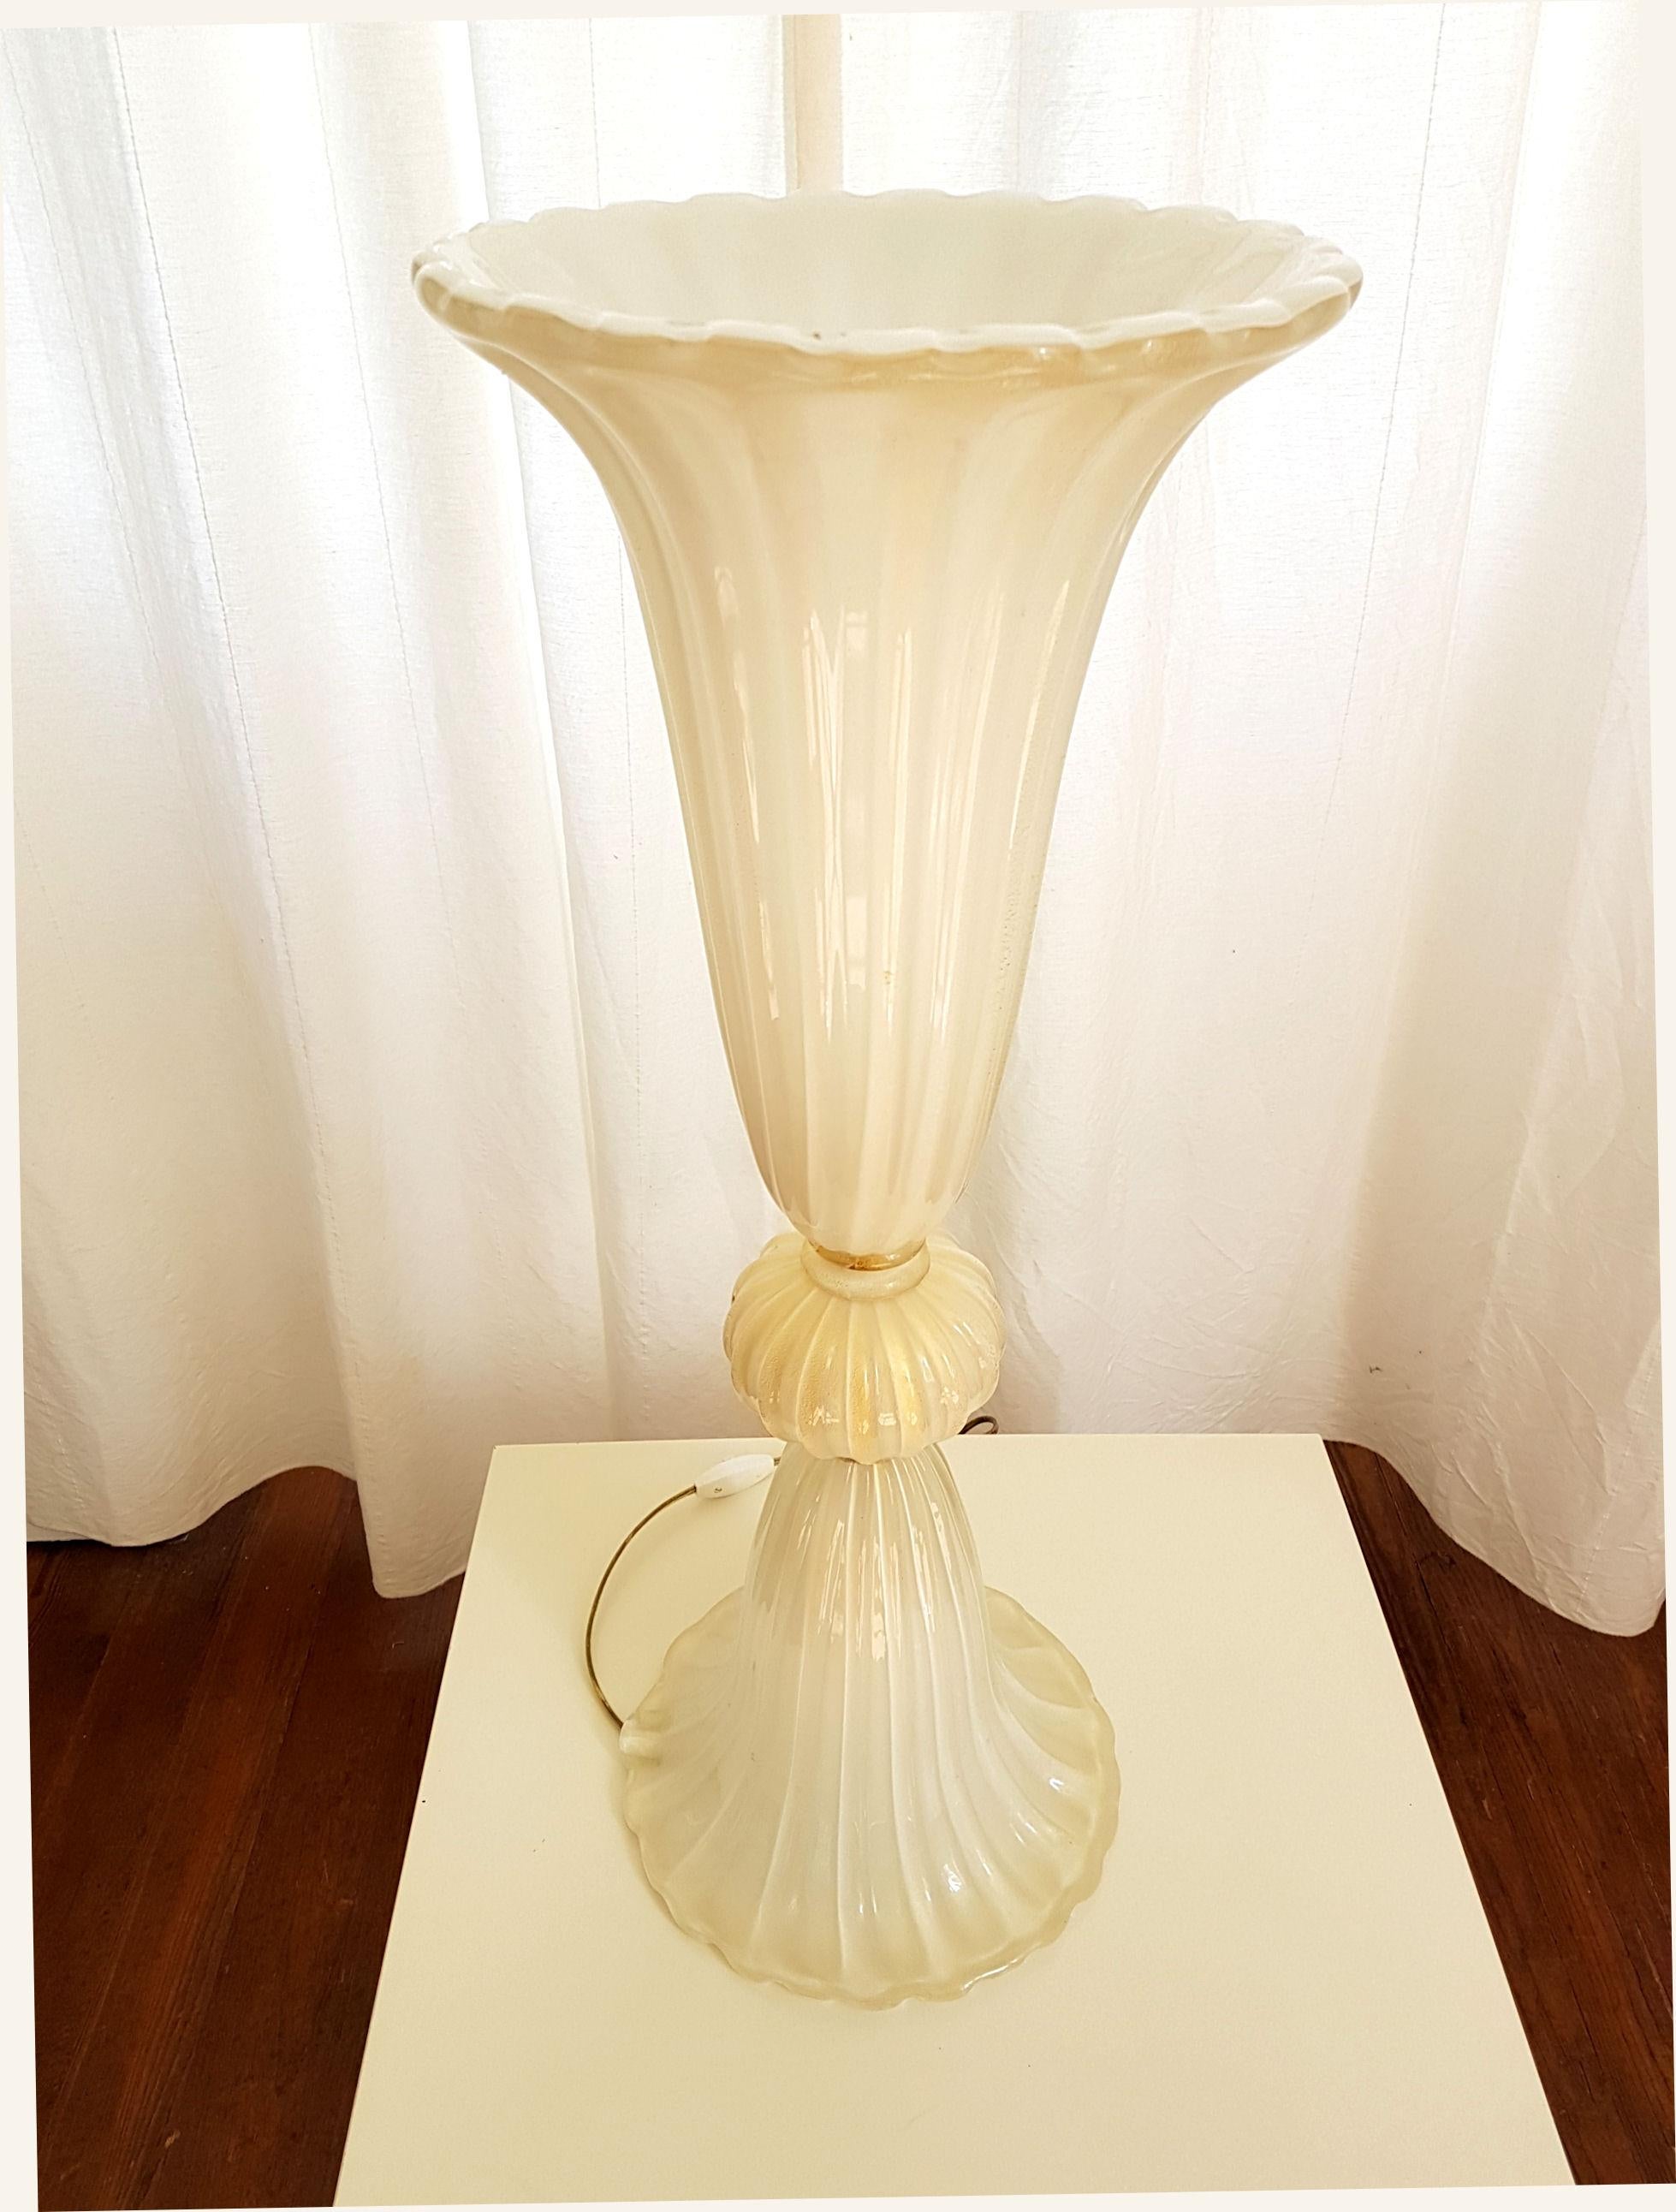 Hand-Crafted Large Murano Glass Table/Floor Lamps Mid-Century Modern Barovier Style Italy 70s